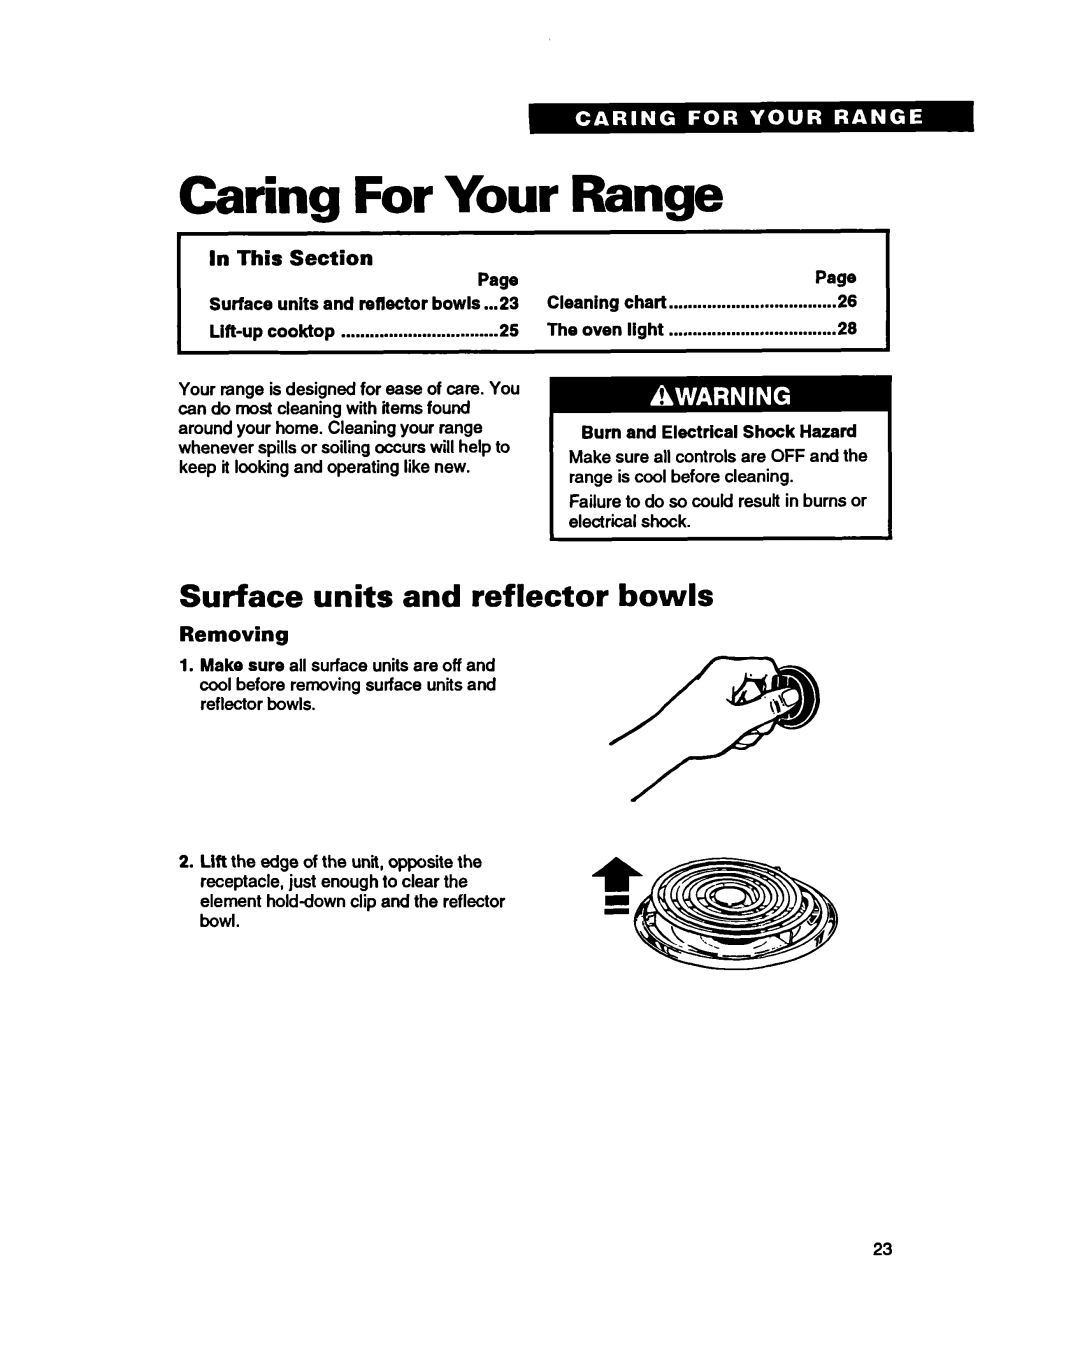 Whirlpool RF365PXY Caring For Your Range, Surface units and reflector bowls, In This Section, Removing, Lift-upcooktop 